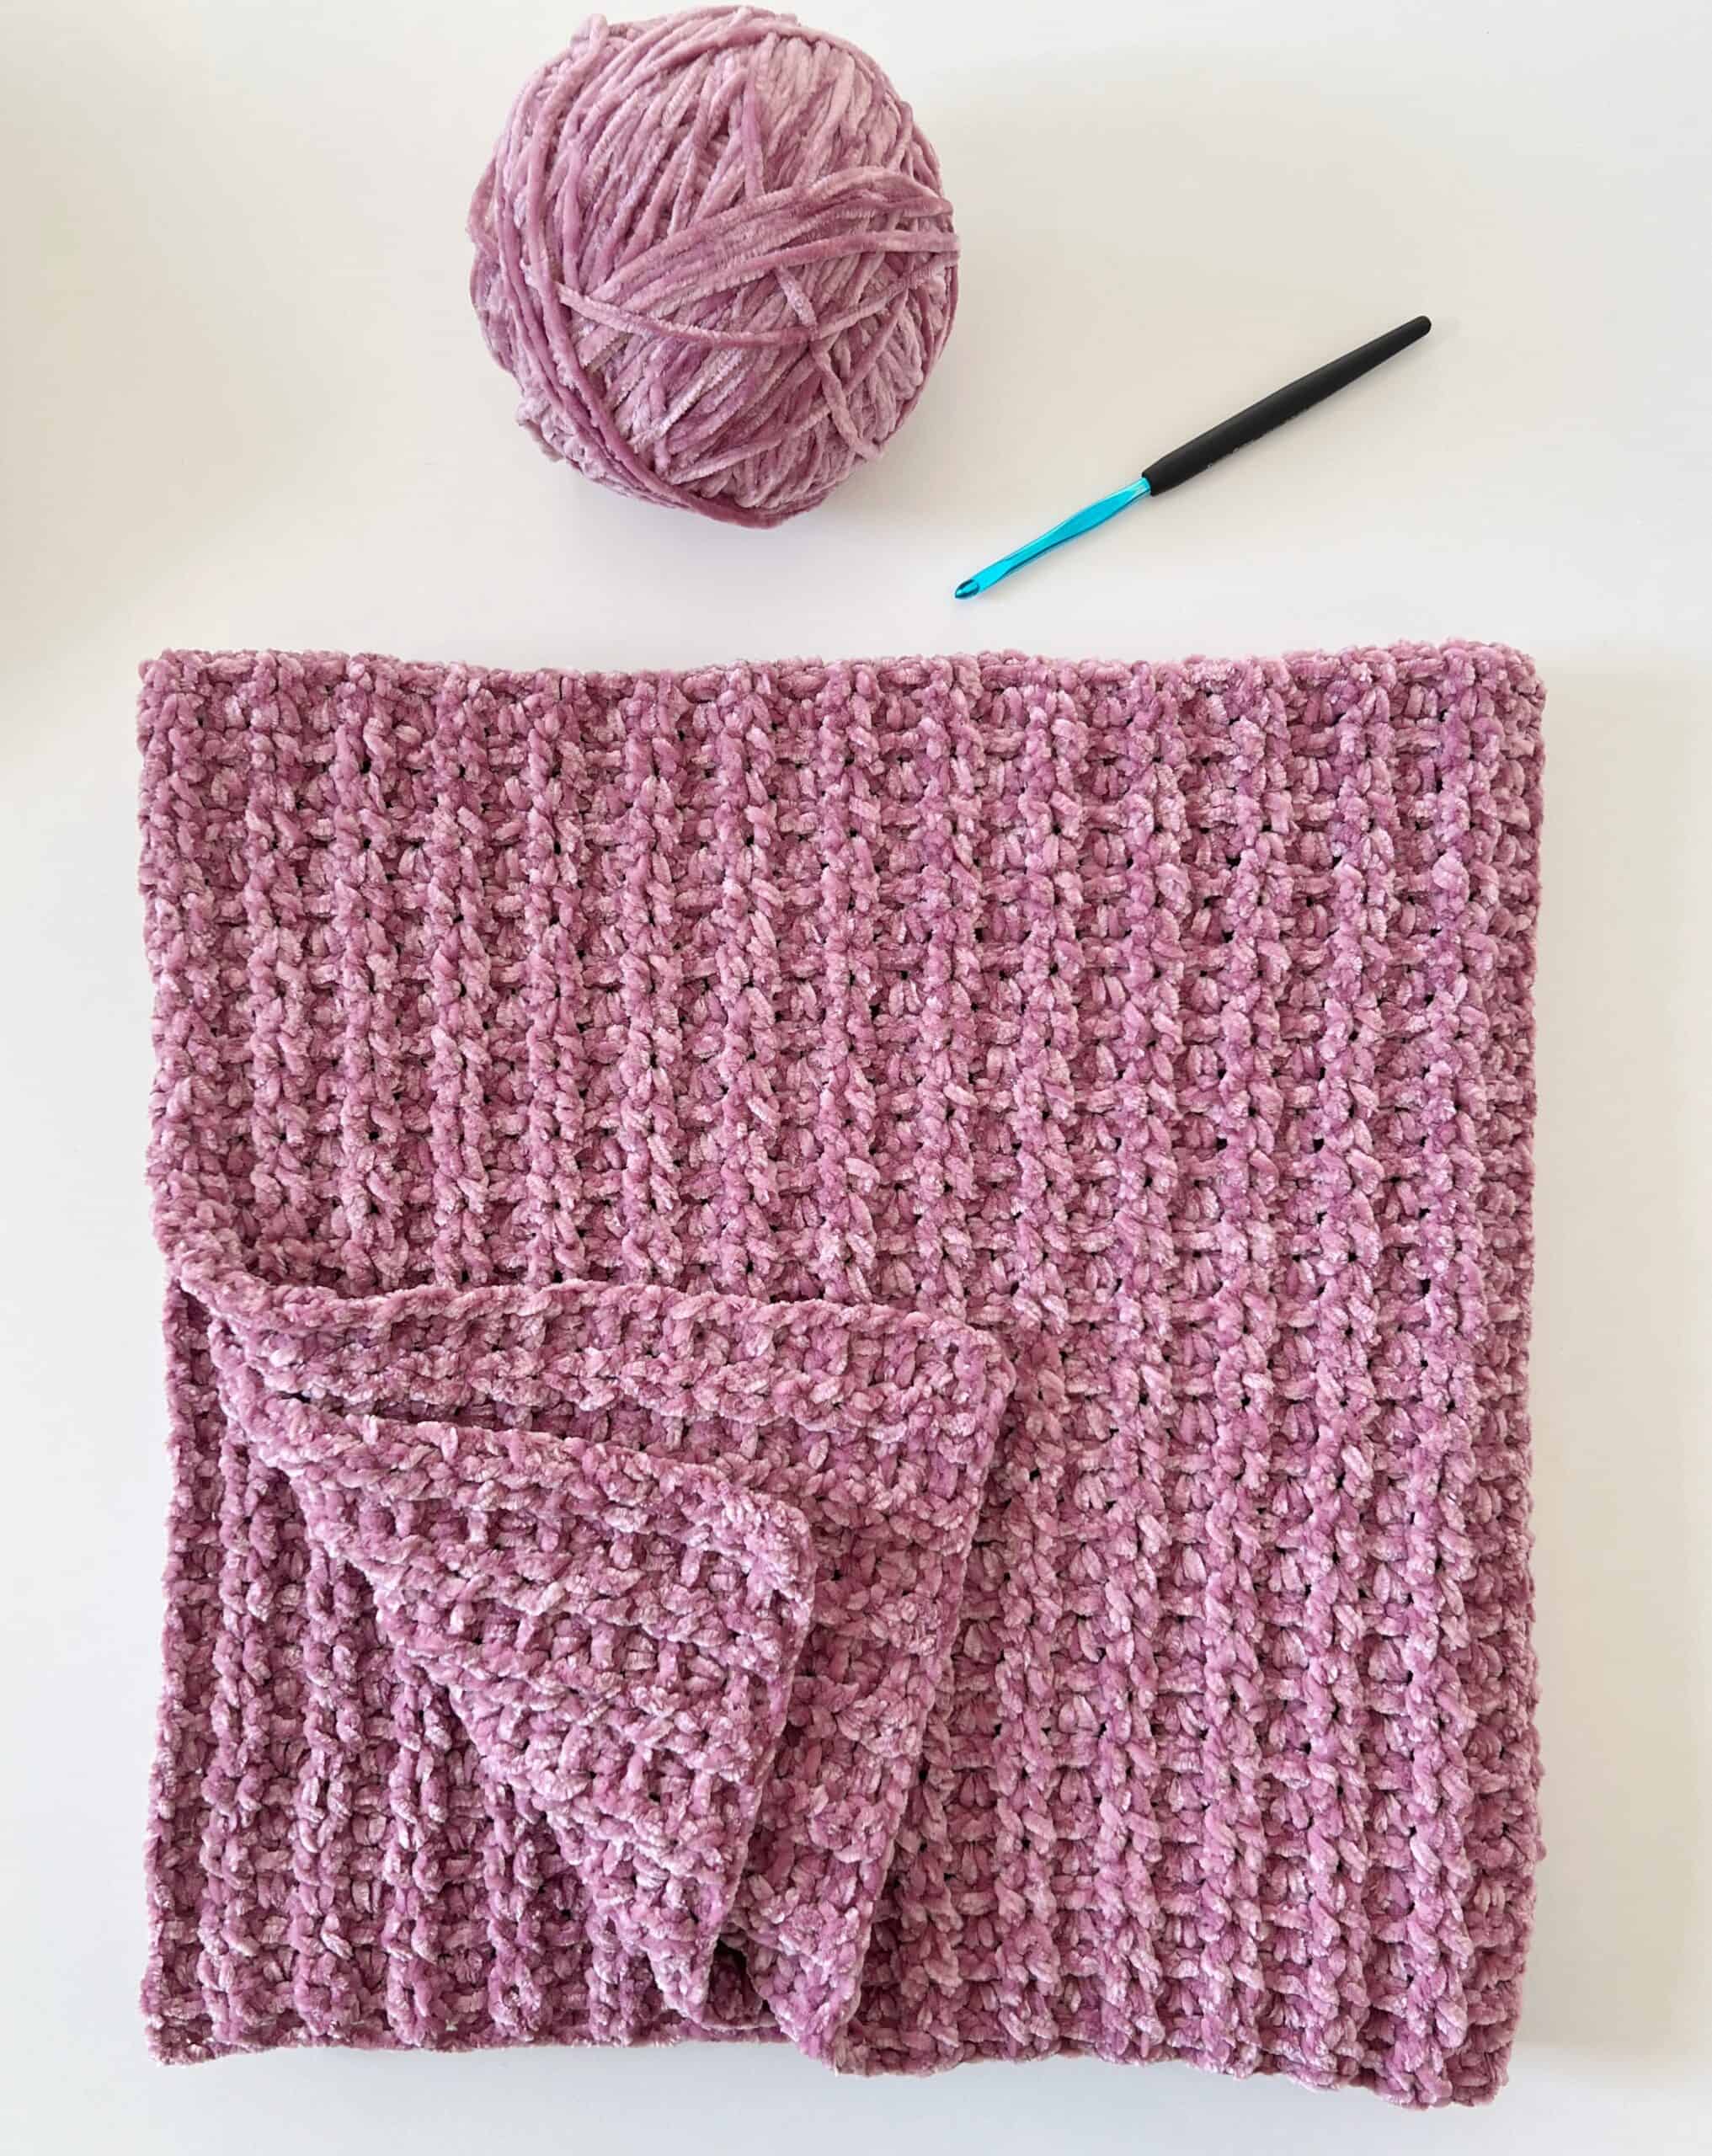 How to Stitch Together a Crochet Quilt With a Tapestry Needle : Crochet  Stitch Tips 